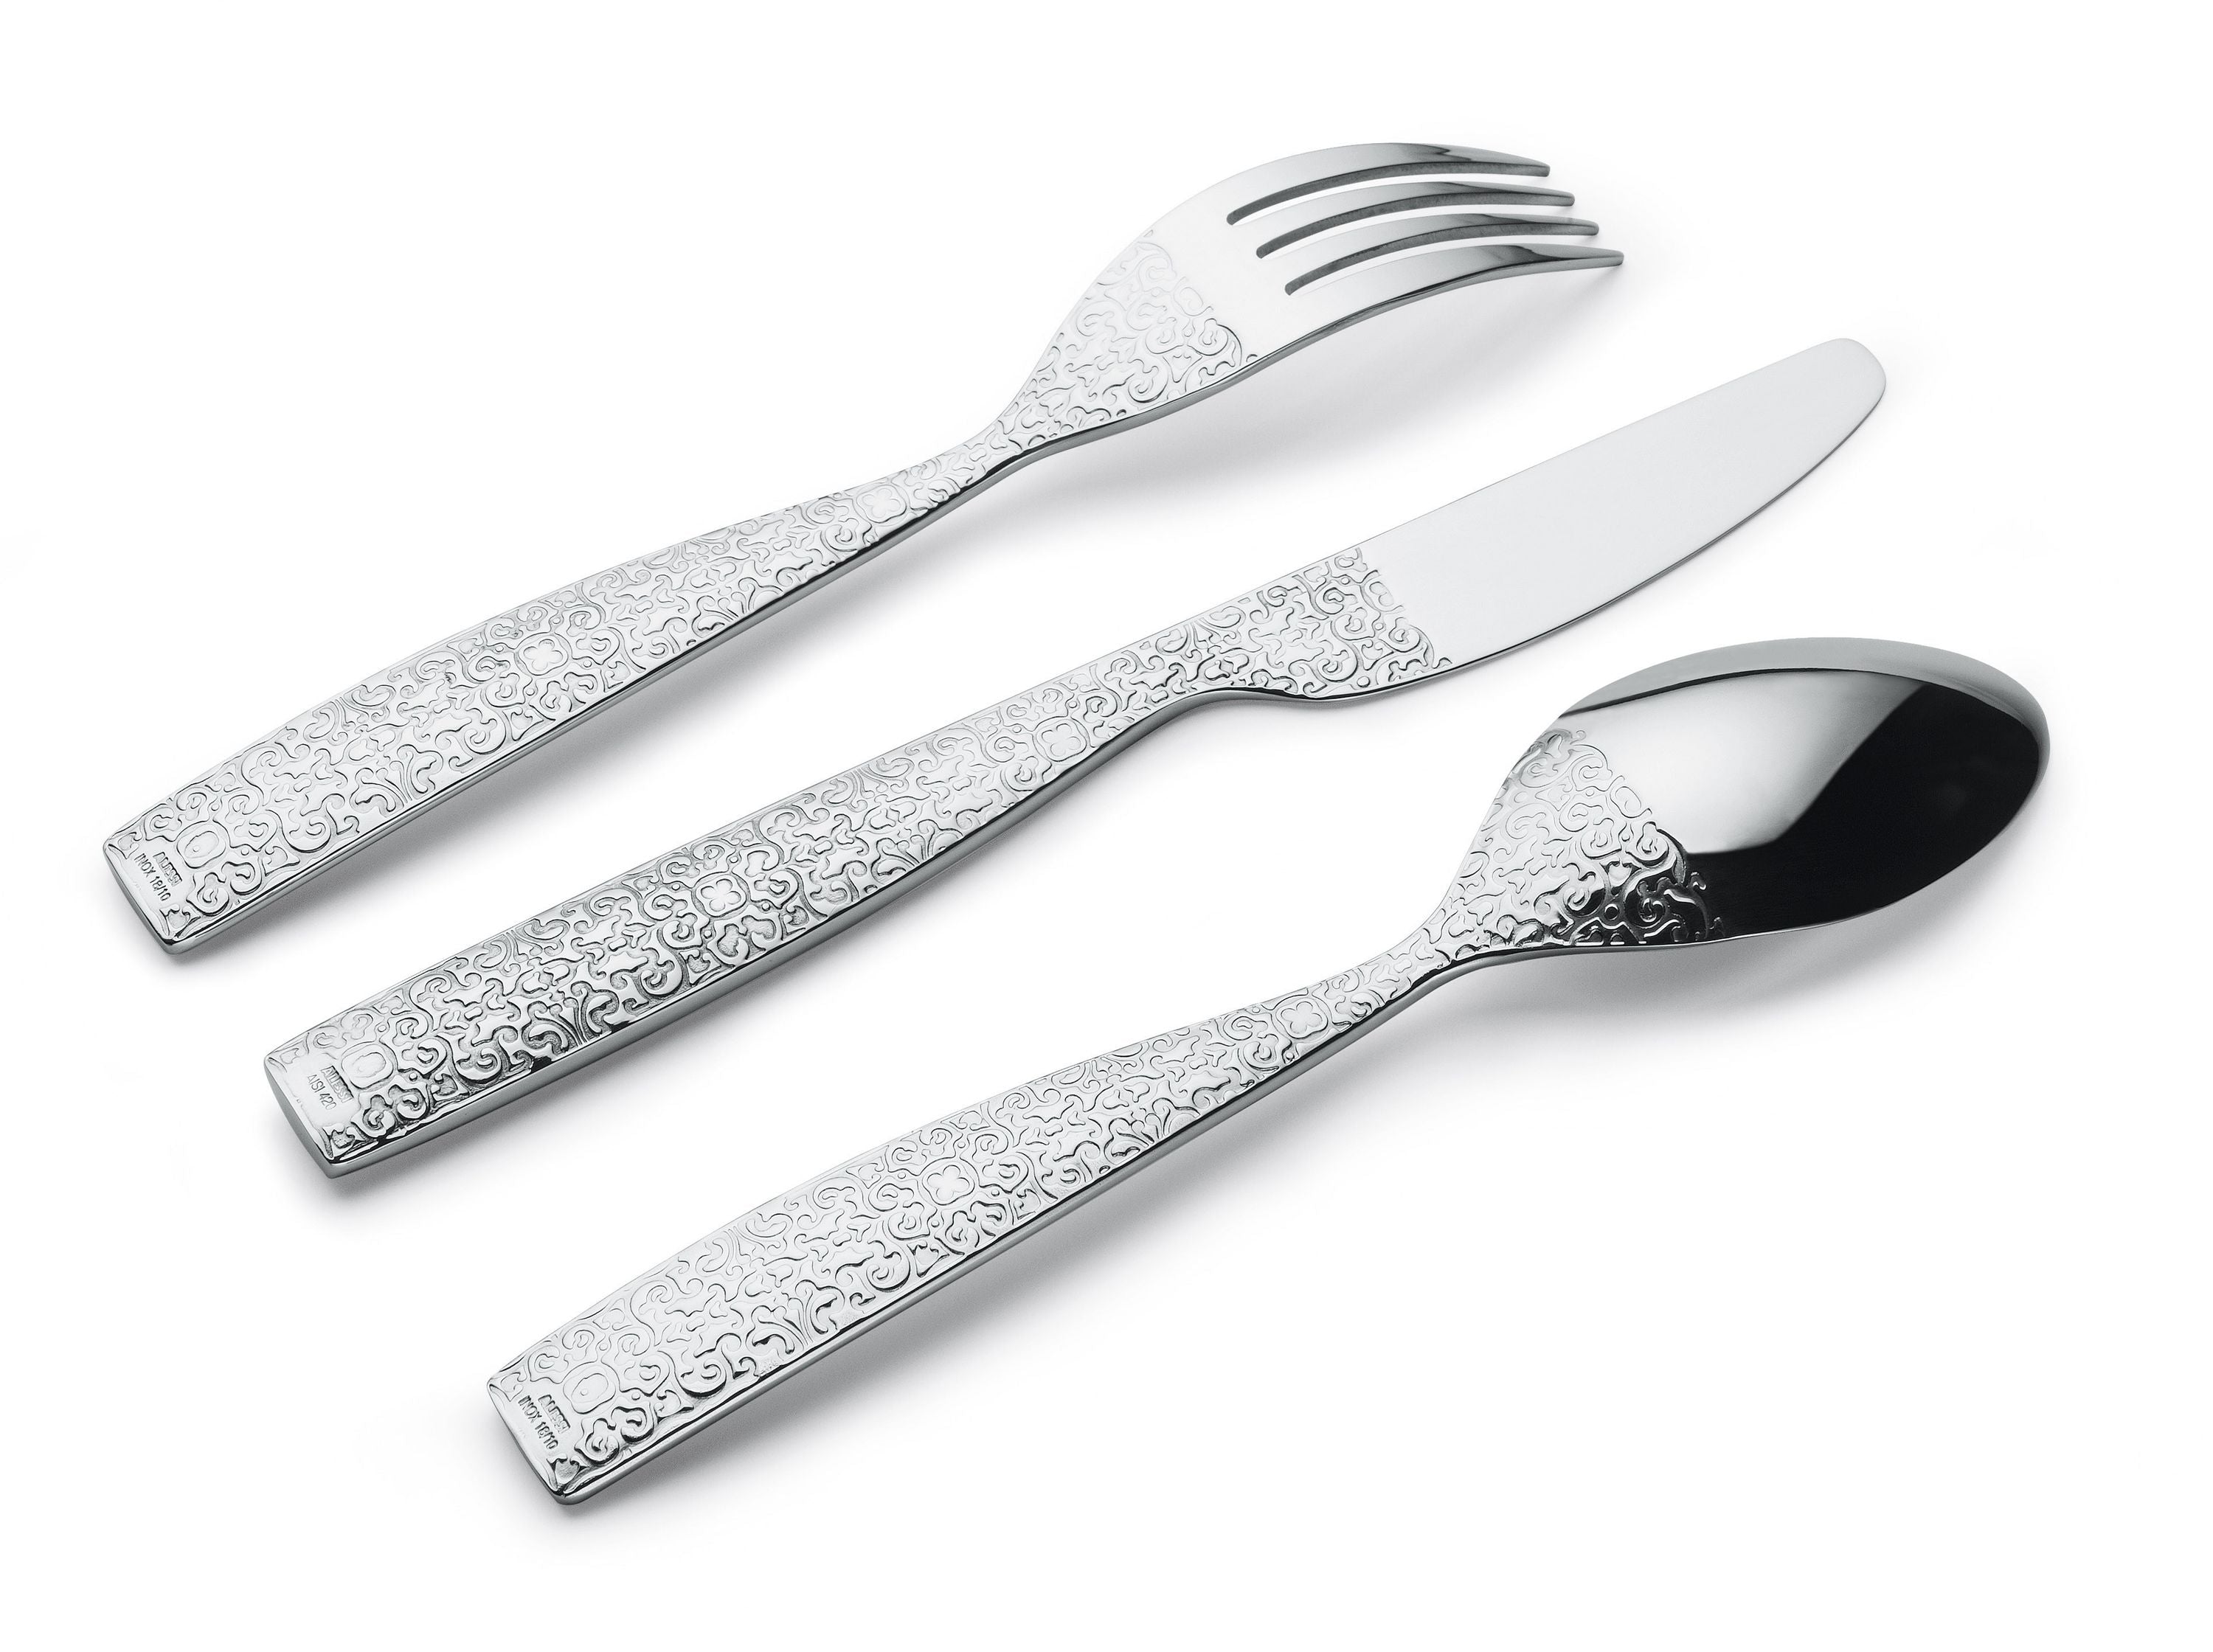 Alessi "Dressed" Cutlery Set, 24 Pieces